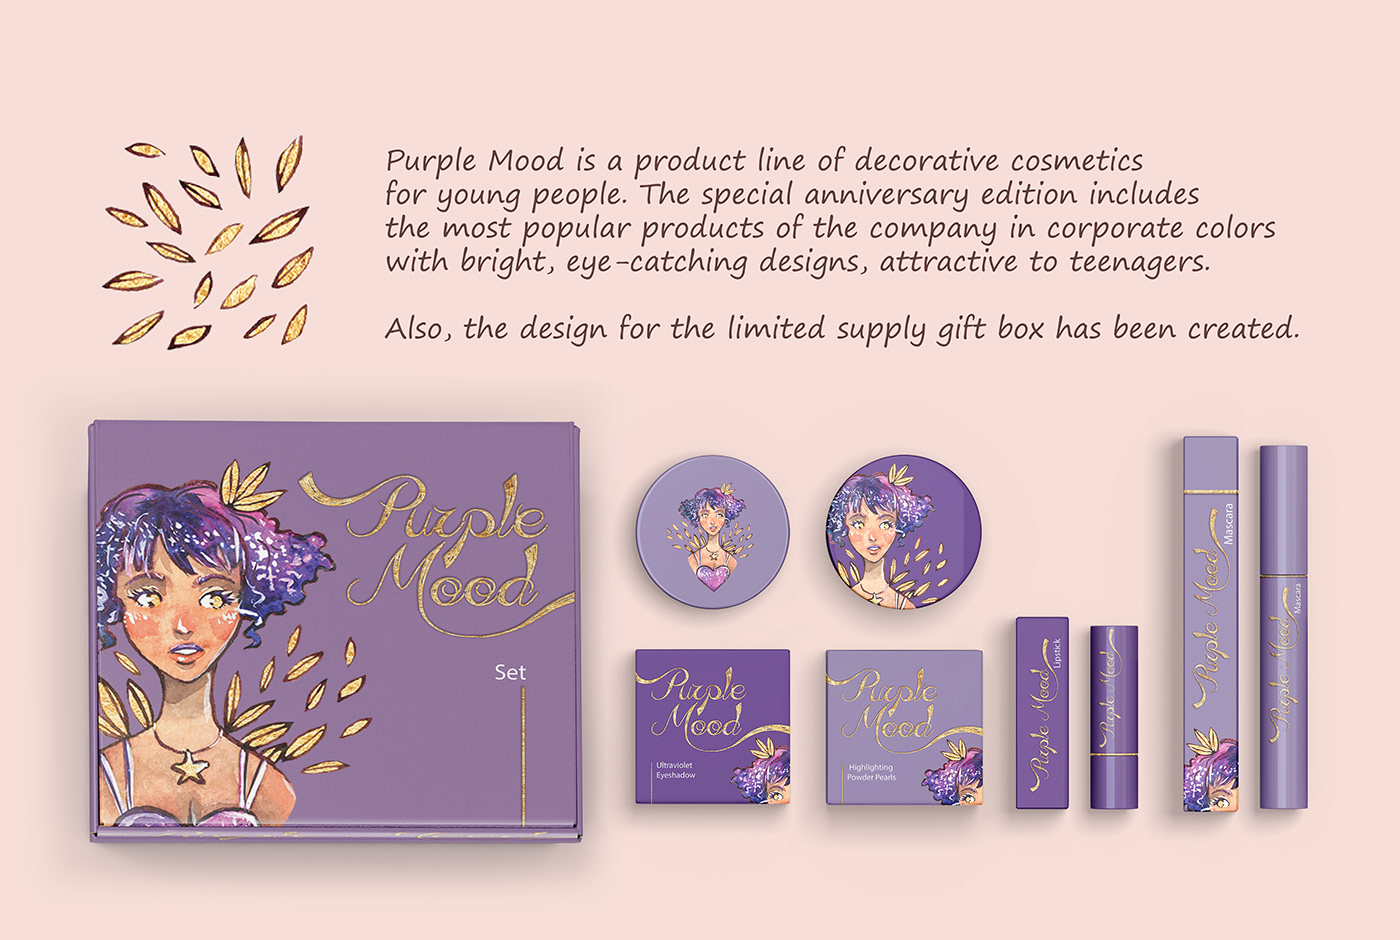 a product line of decorative cosmetics, the design and illustration for the limited supply gift box 